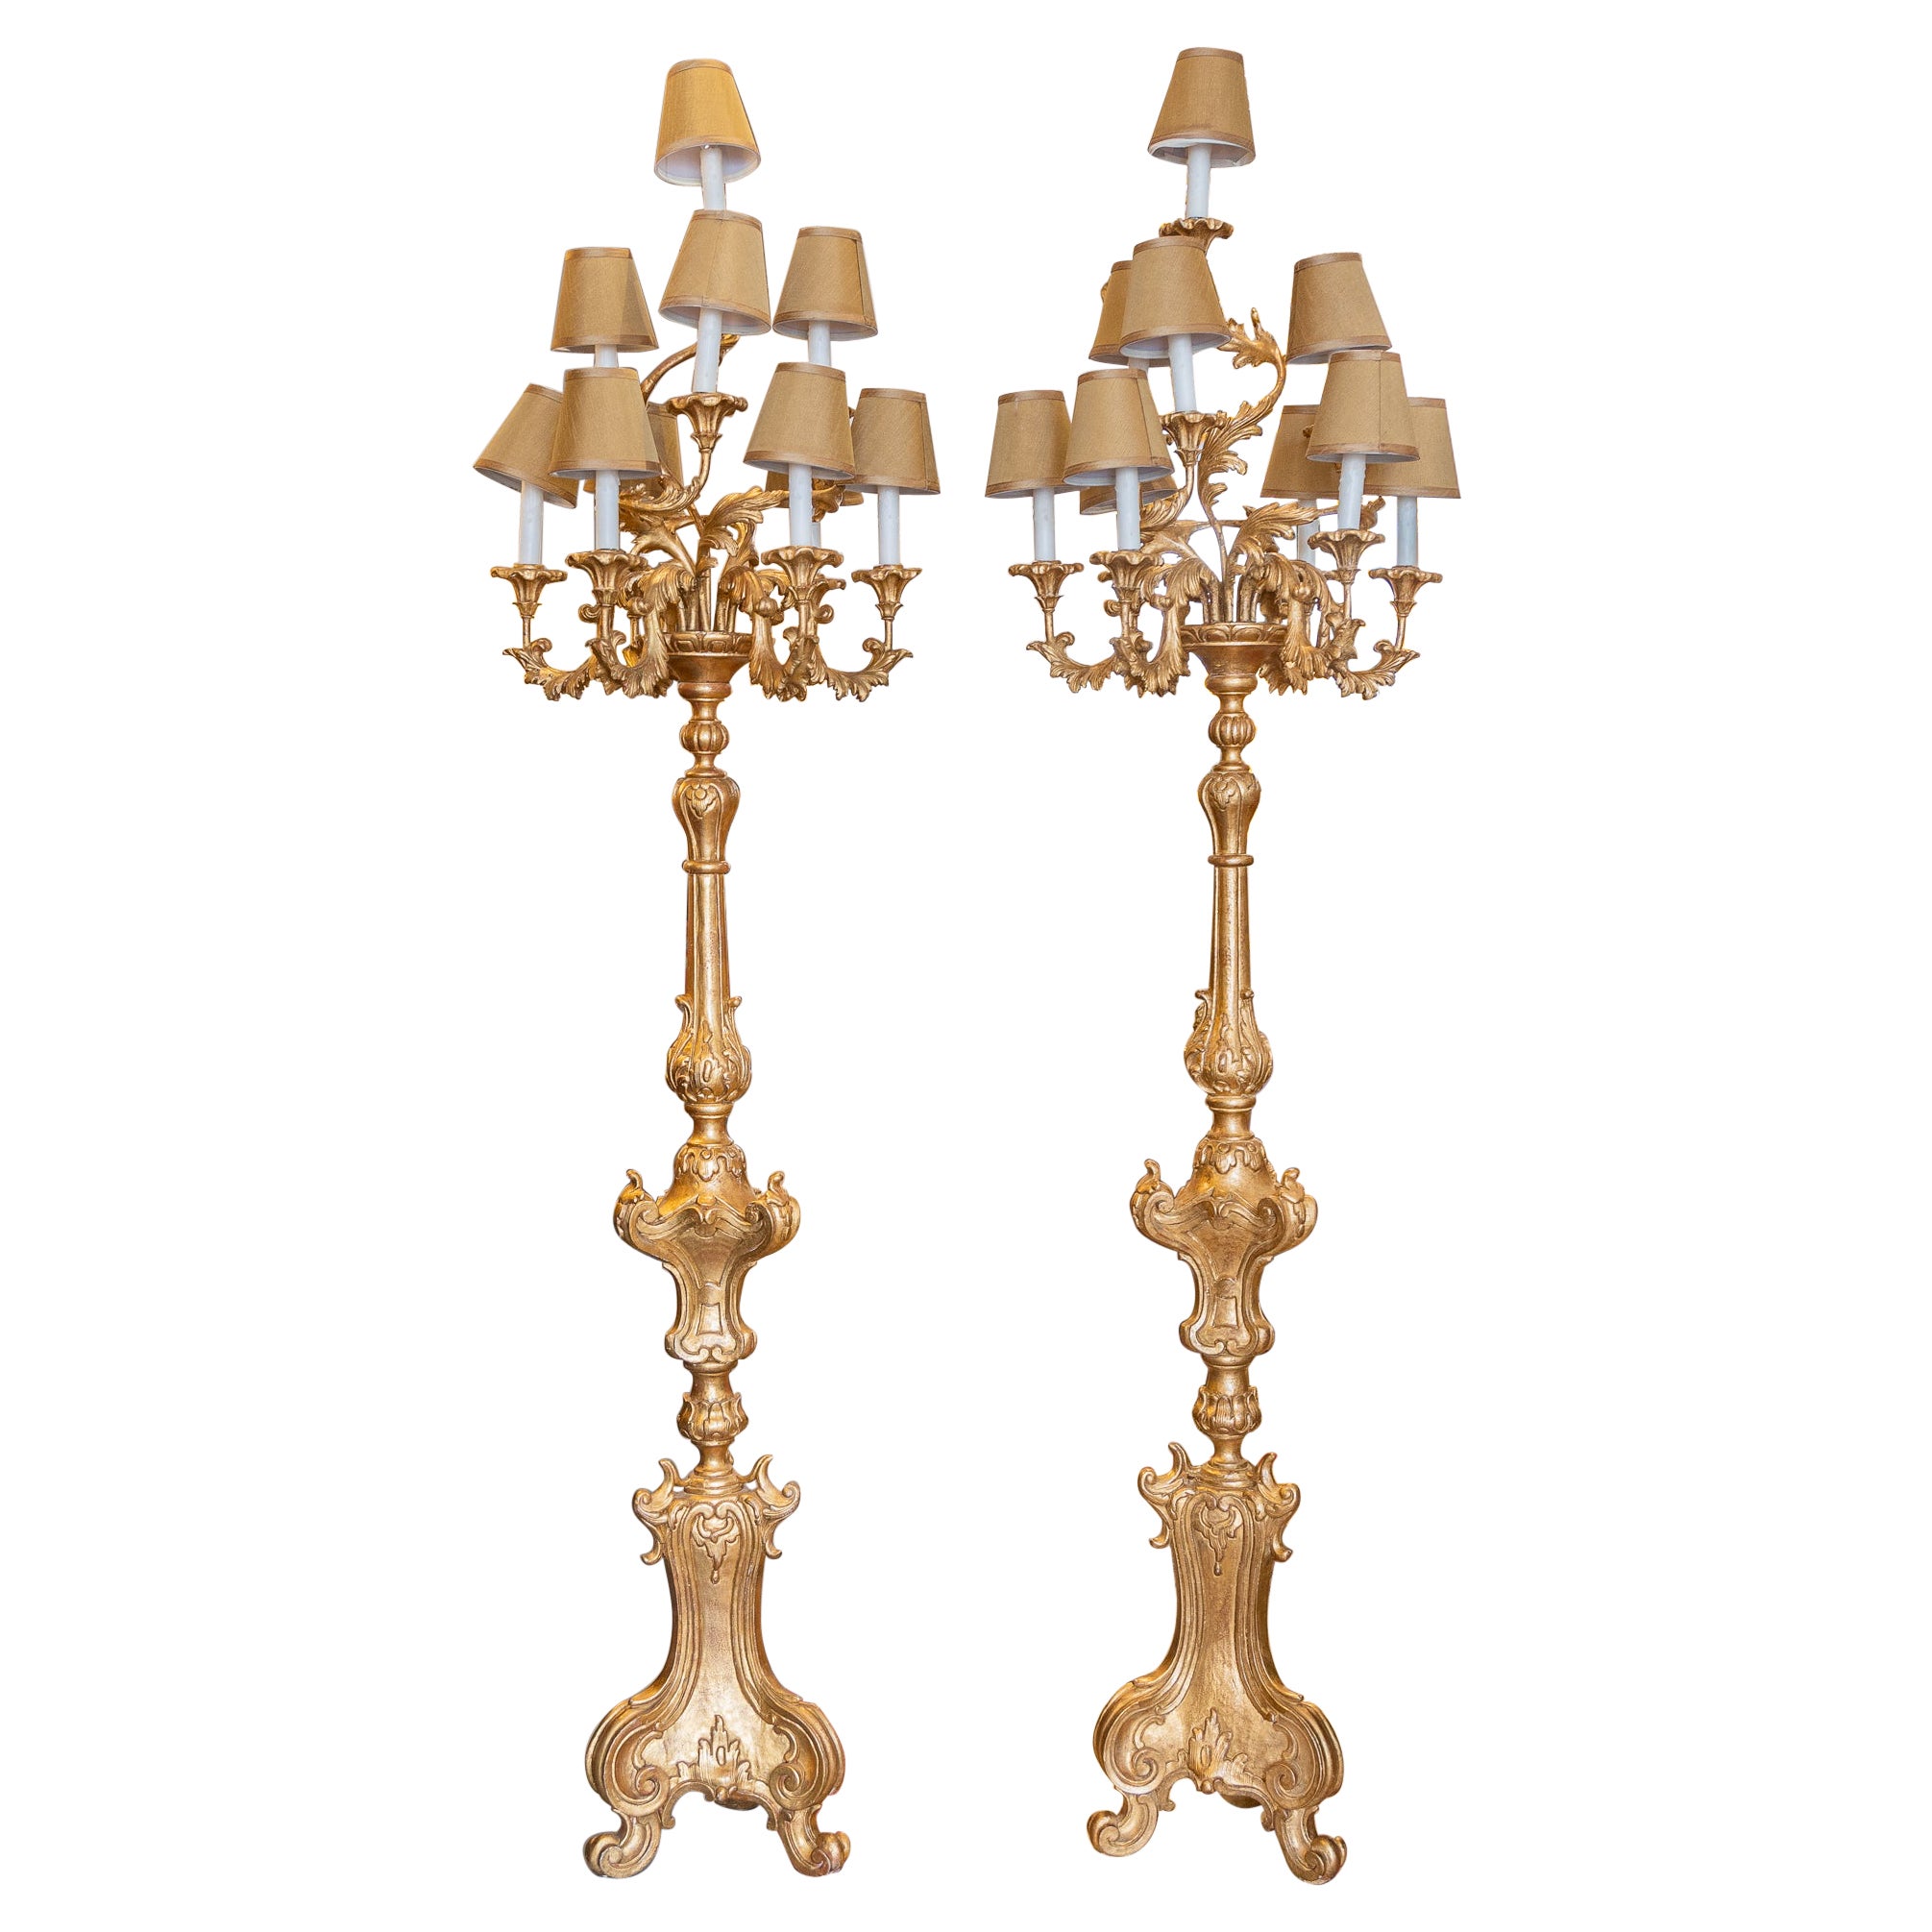 Fine Pair of Gilt Carved French Early 20th C Candelabra Floor Lamps 10 Lights